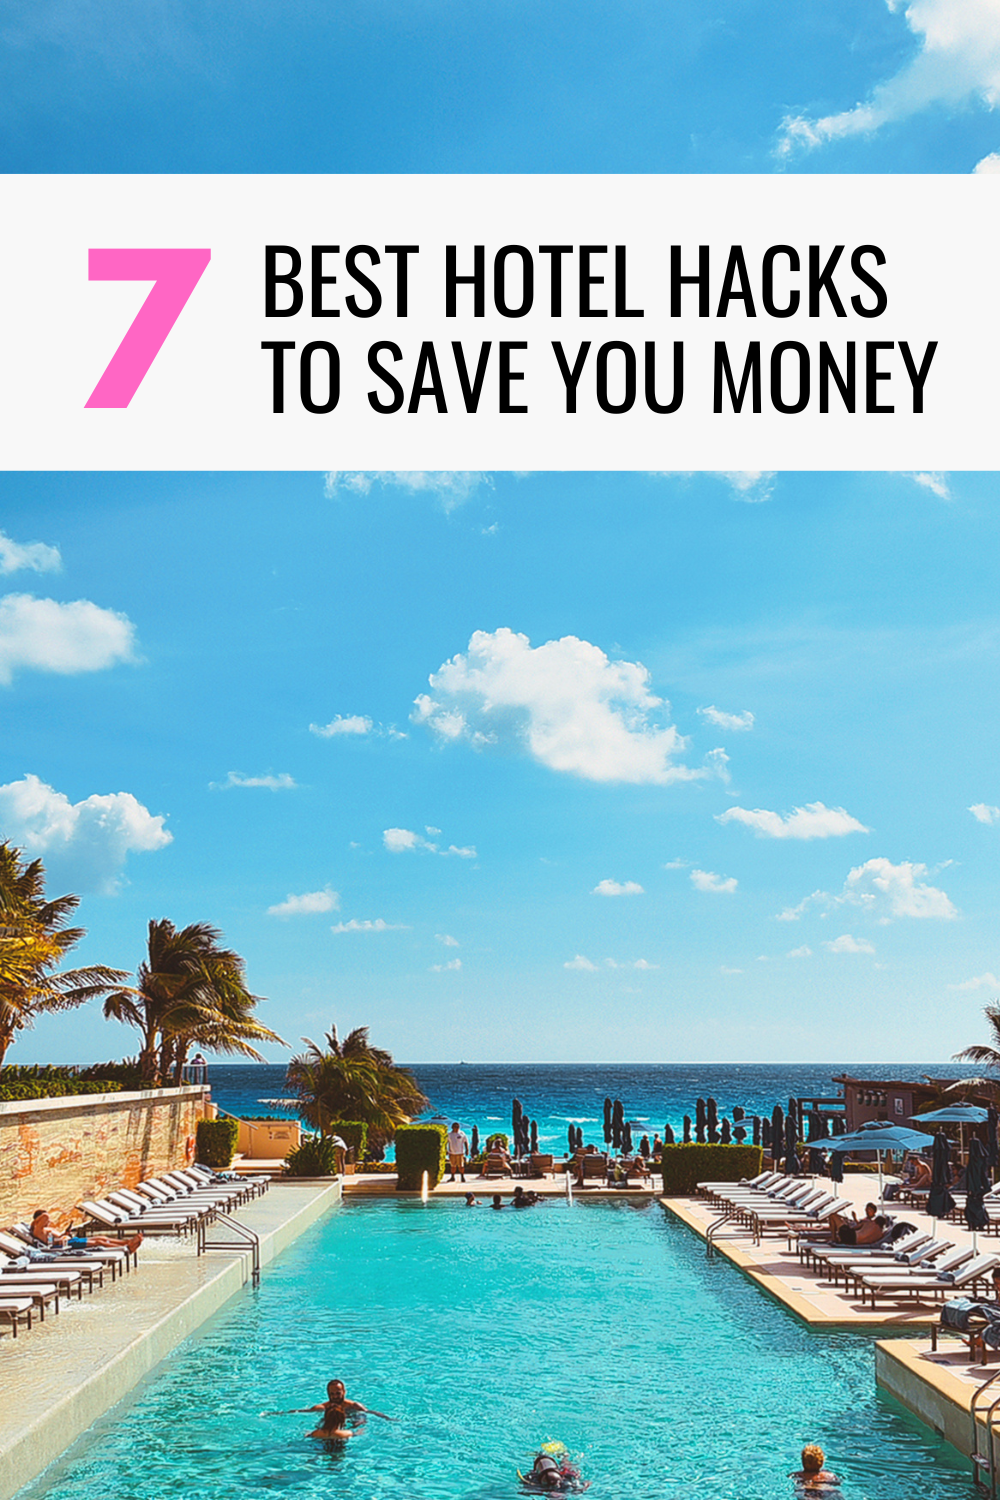 pinterest cover image of hotel with text: 7 best hotel hacks to save you money